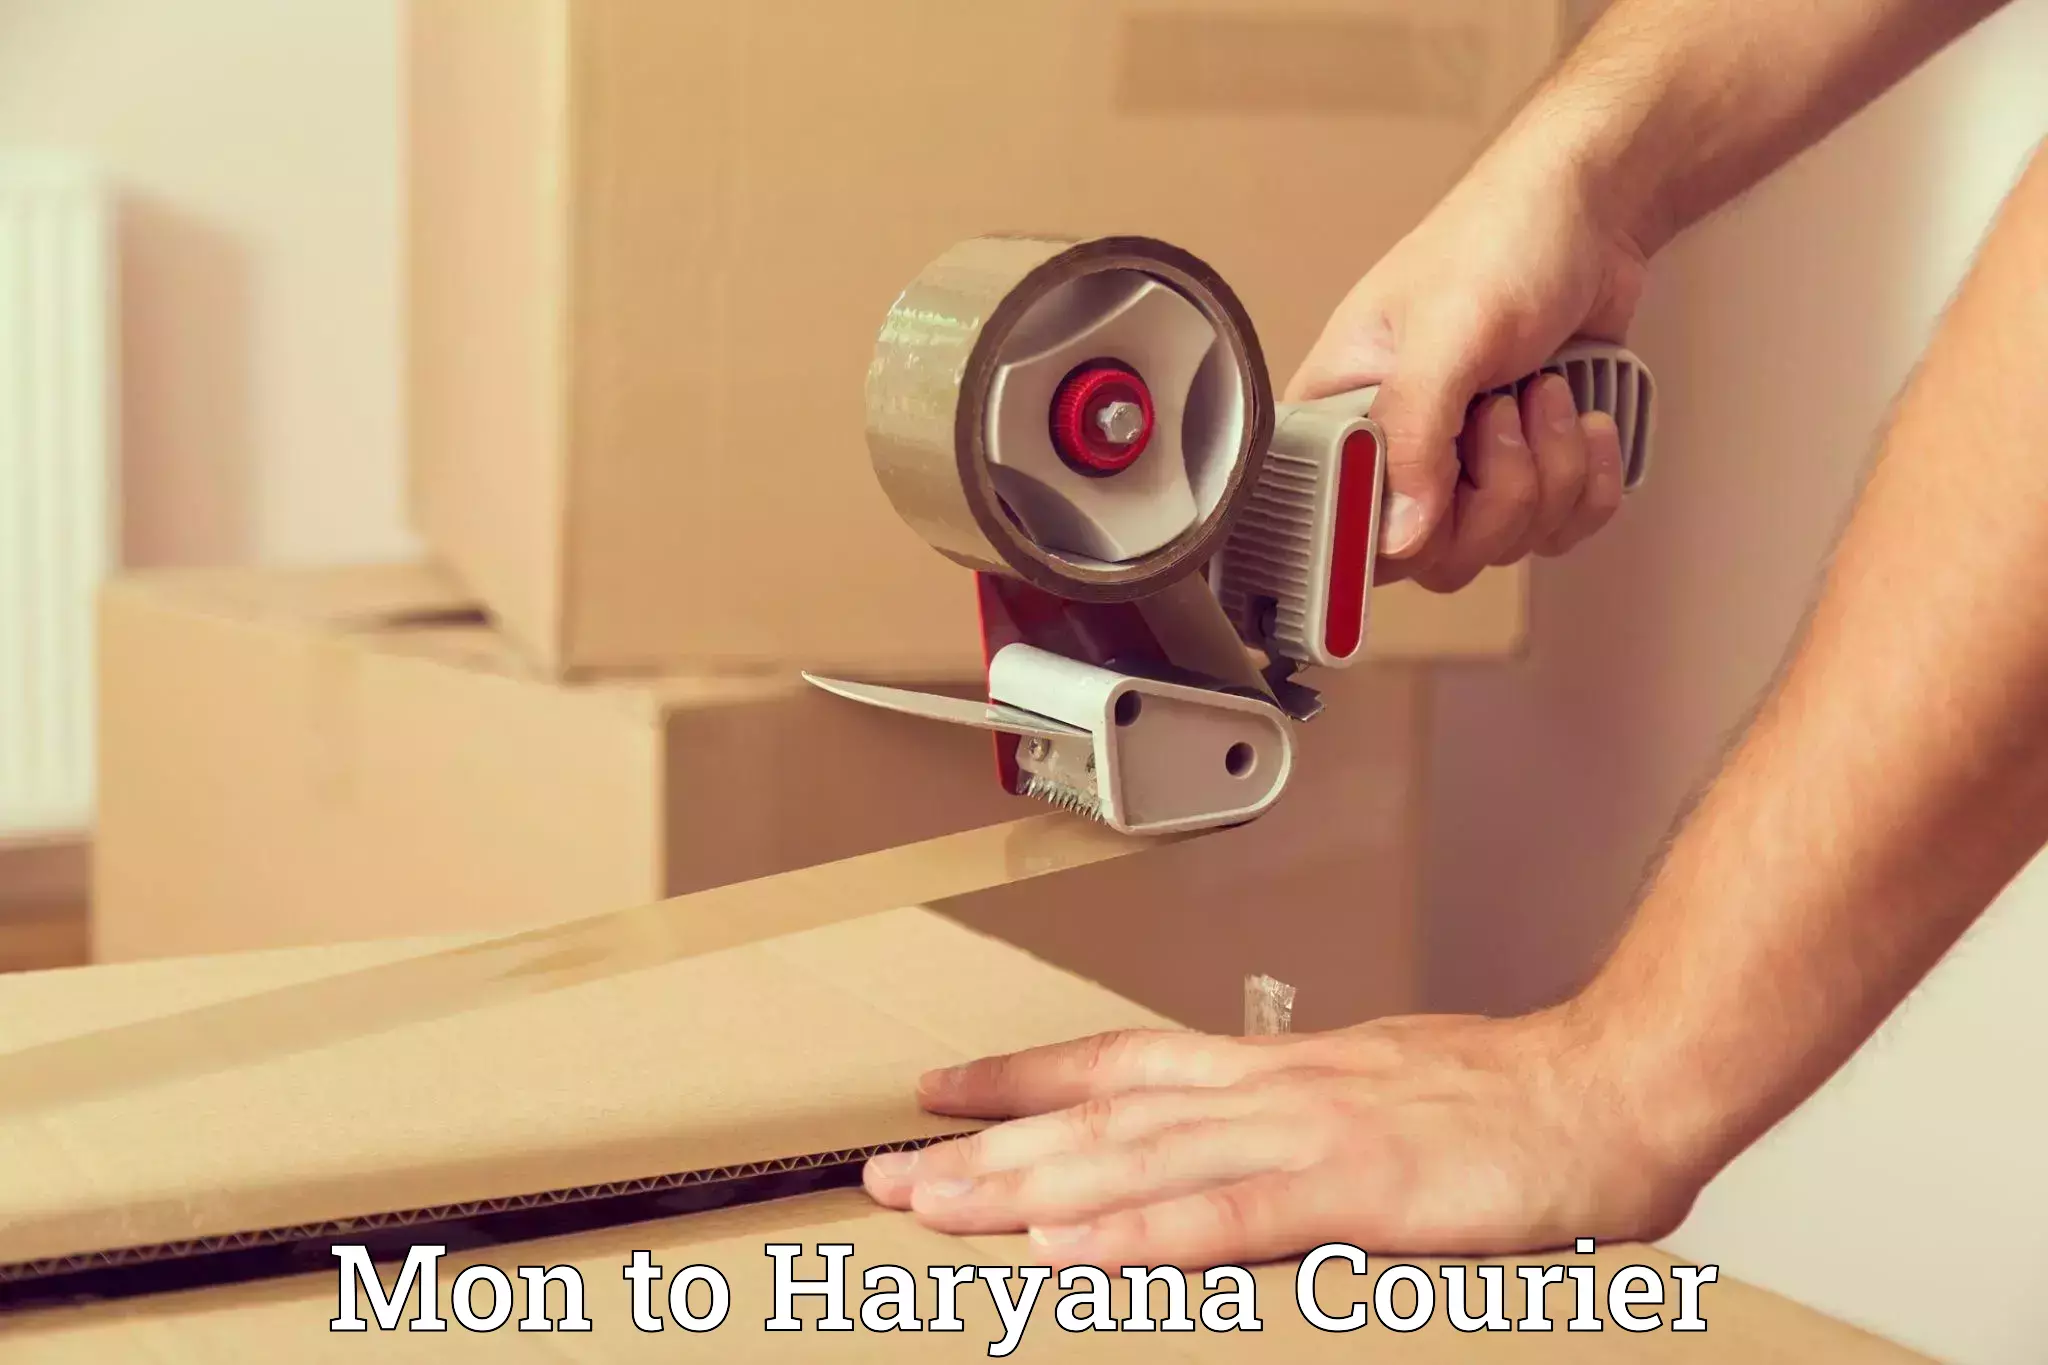 Moving service excellence Mon to Haryana